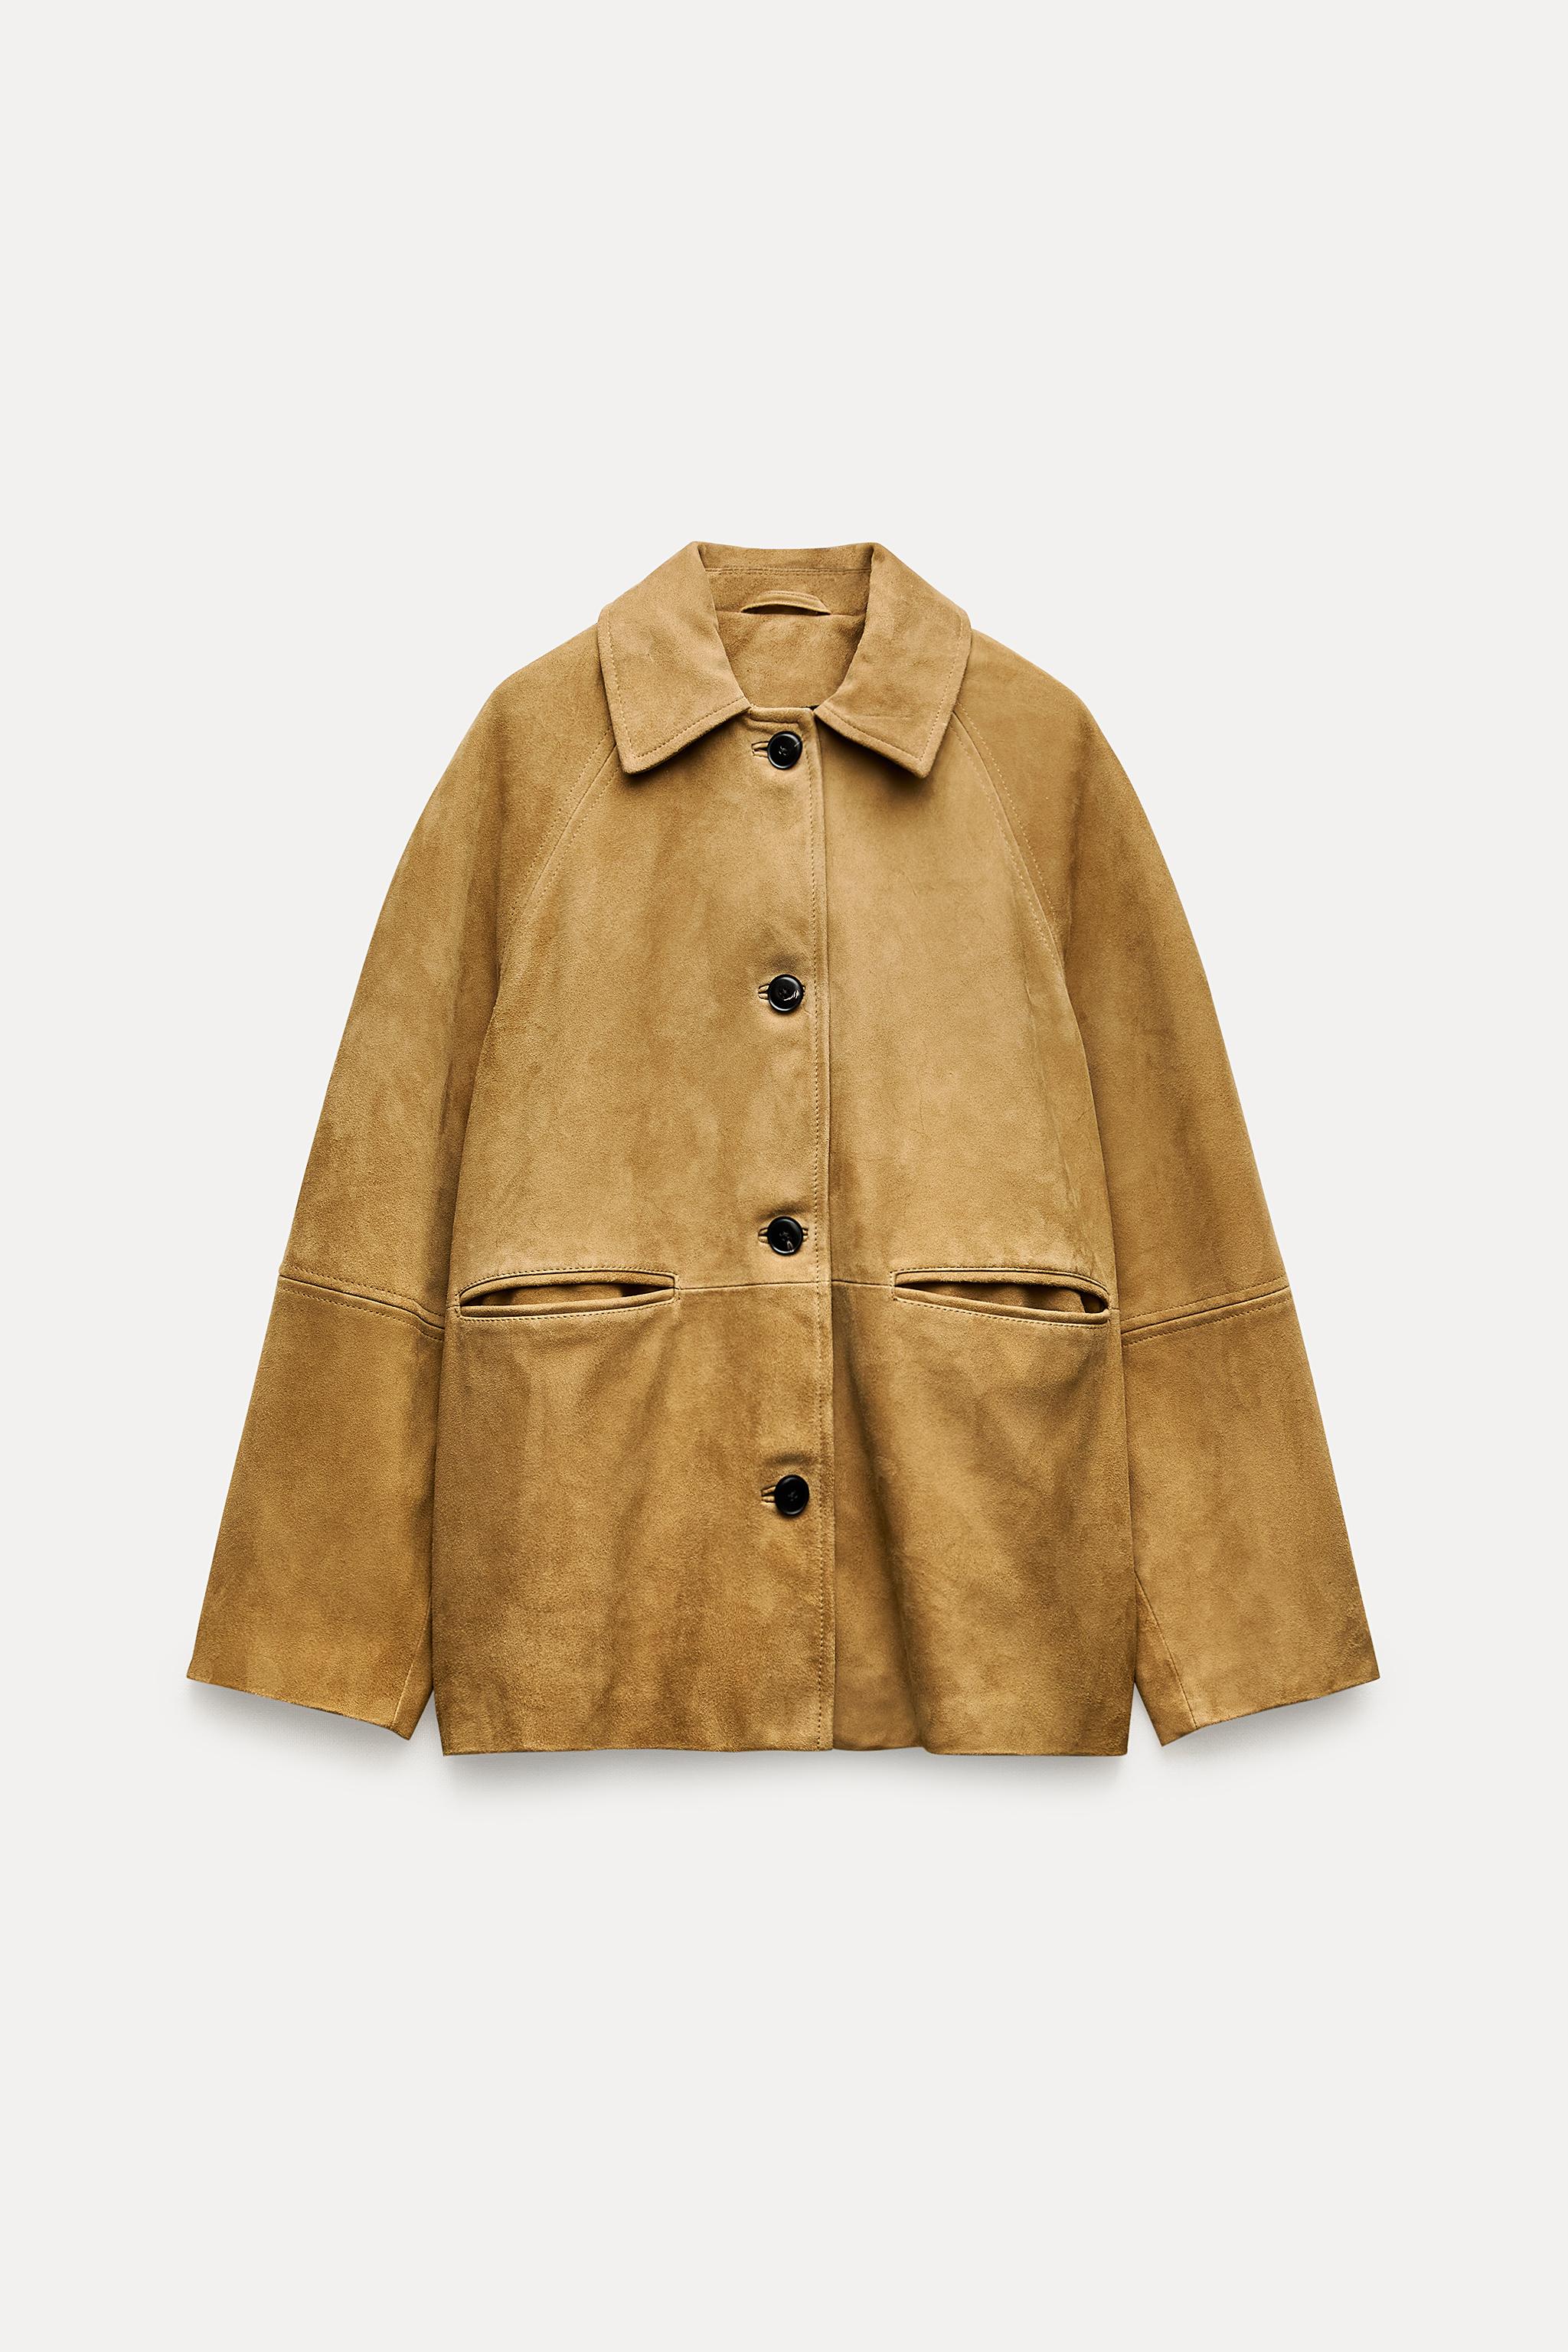 SUEDE LEATHER JACKET ZW COLLECTION - Light camel